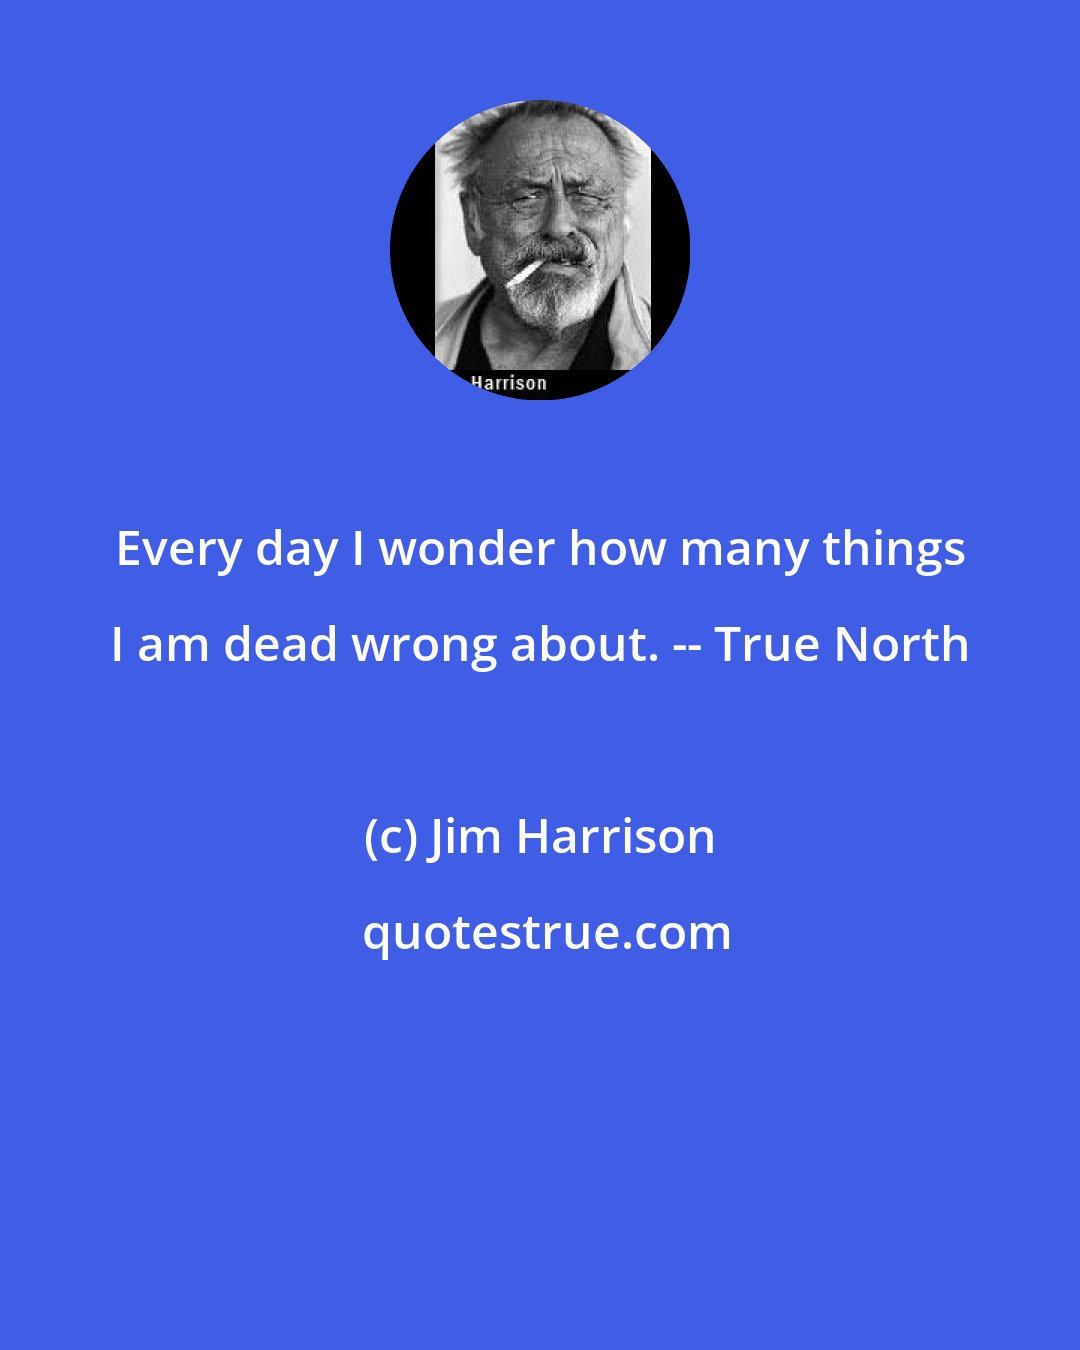 Jim Harrison: Every day I wonder how many things I am dead wrong about. -- True North